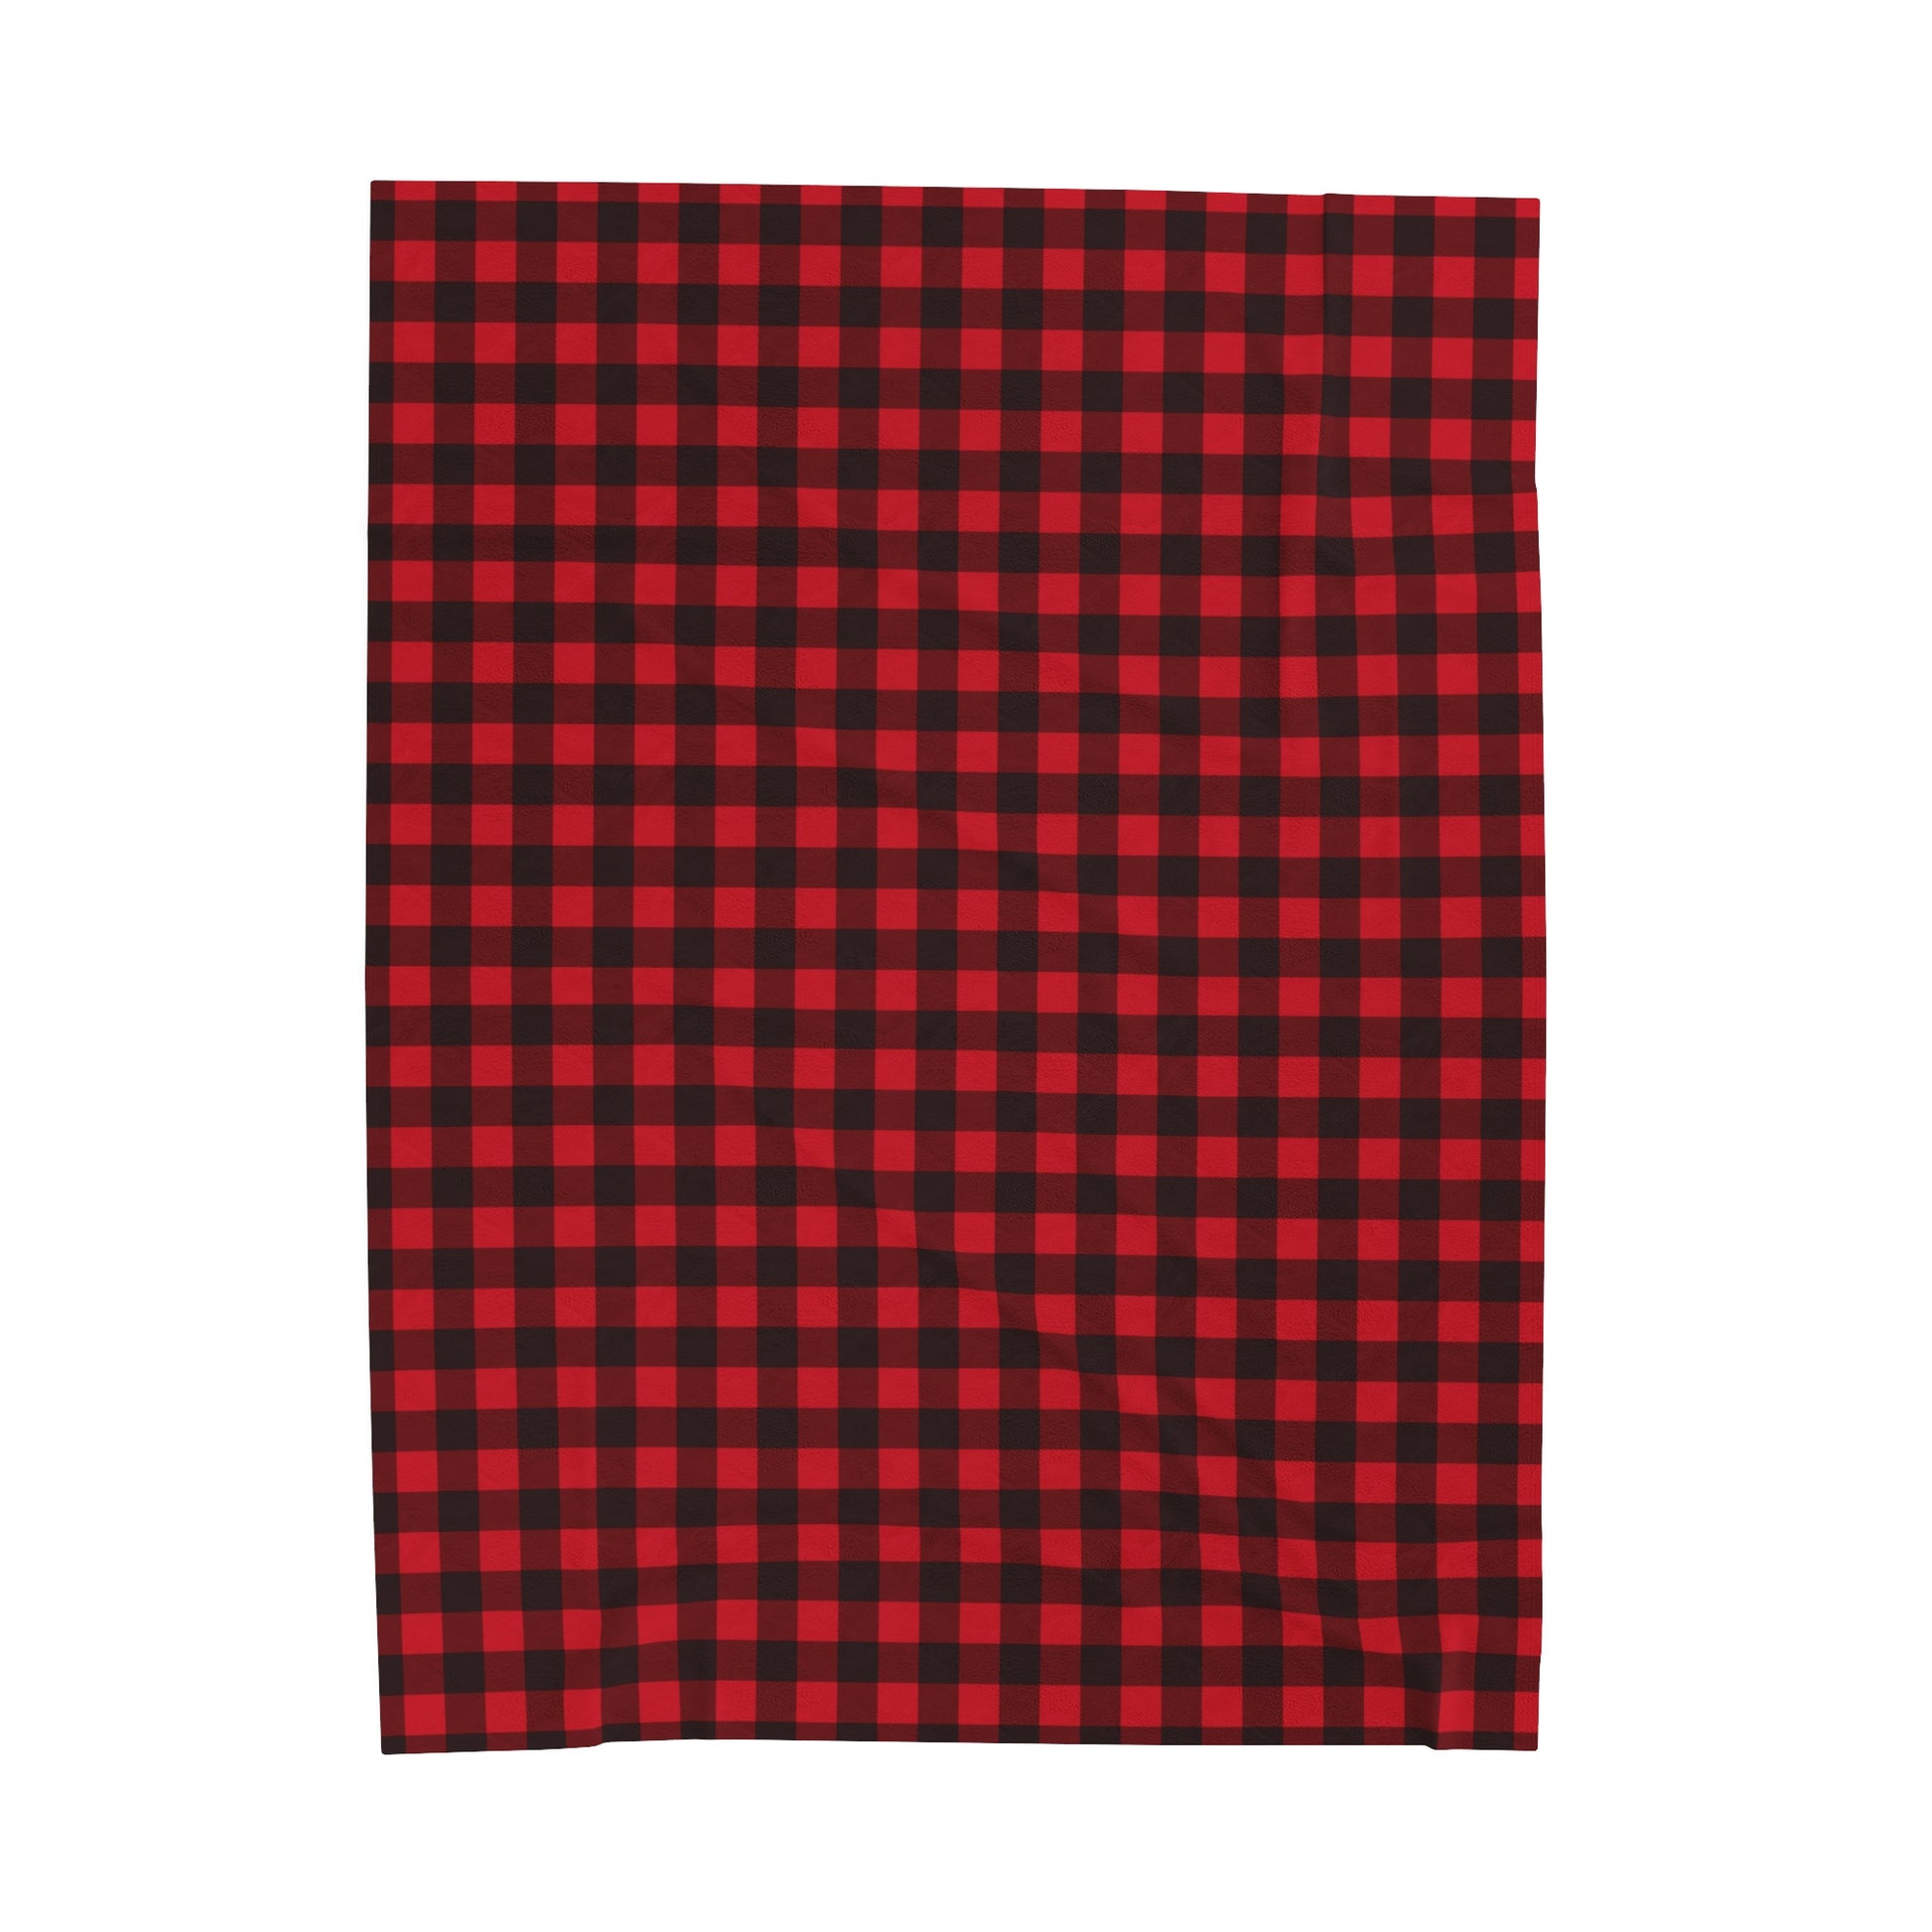 Red Buffalo Plaid Fleece Throw Blanket, Check Christmas Velveteen Soft Plush Fluffy Cozy Warm Adult Kids Small Large Sofa Bed Décor Starcove Fashion